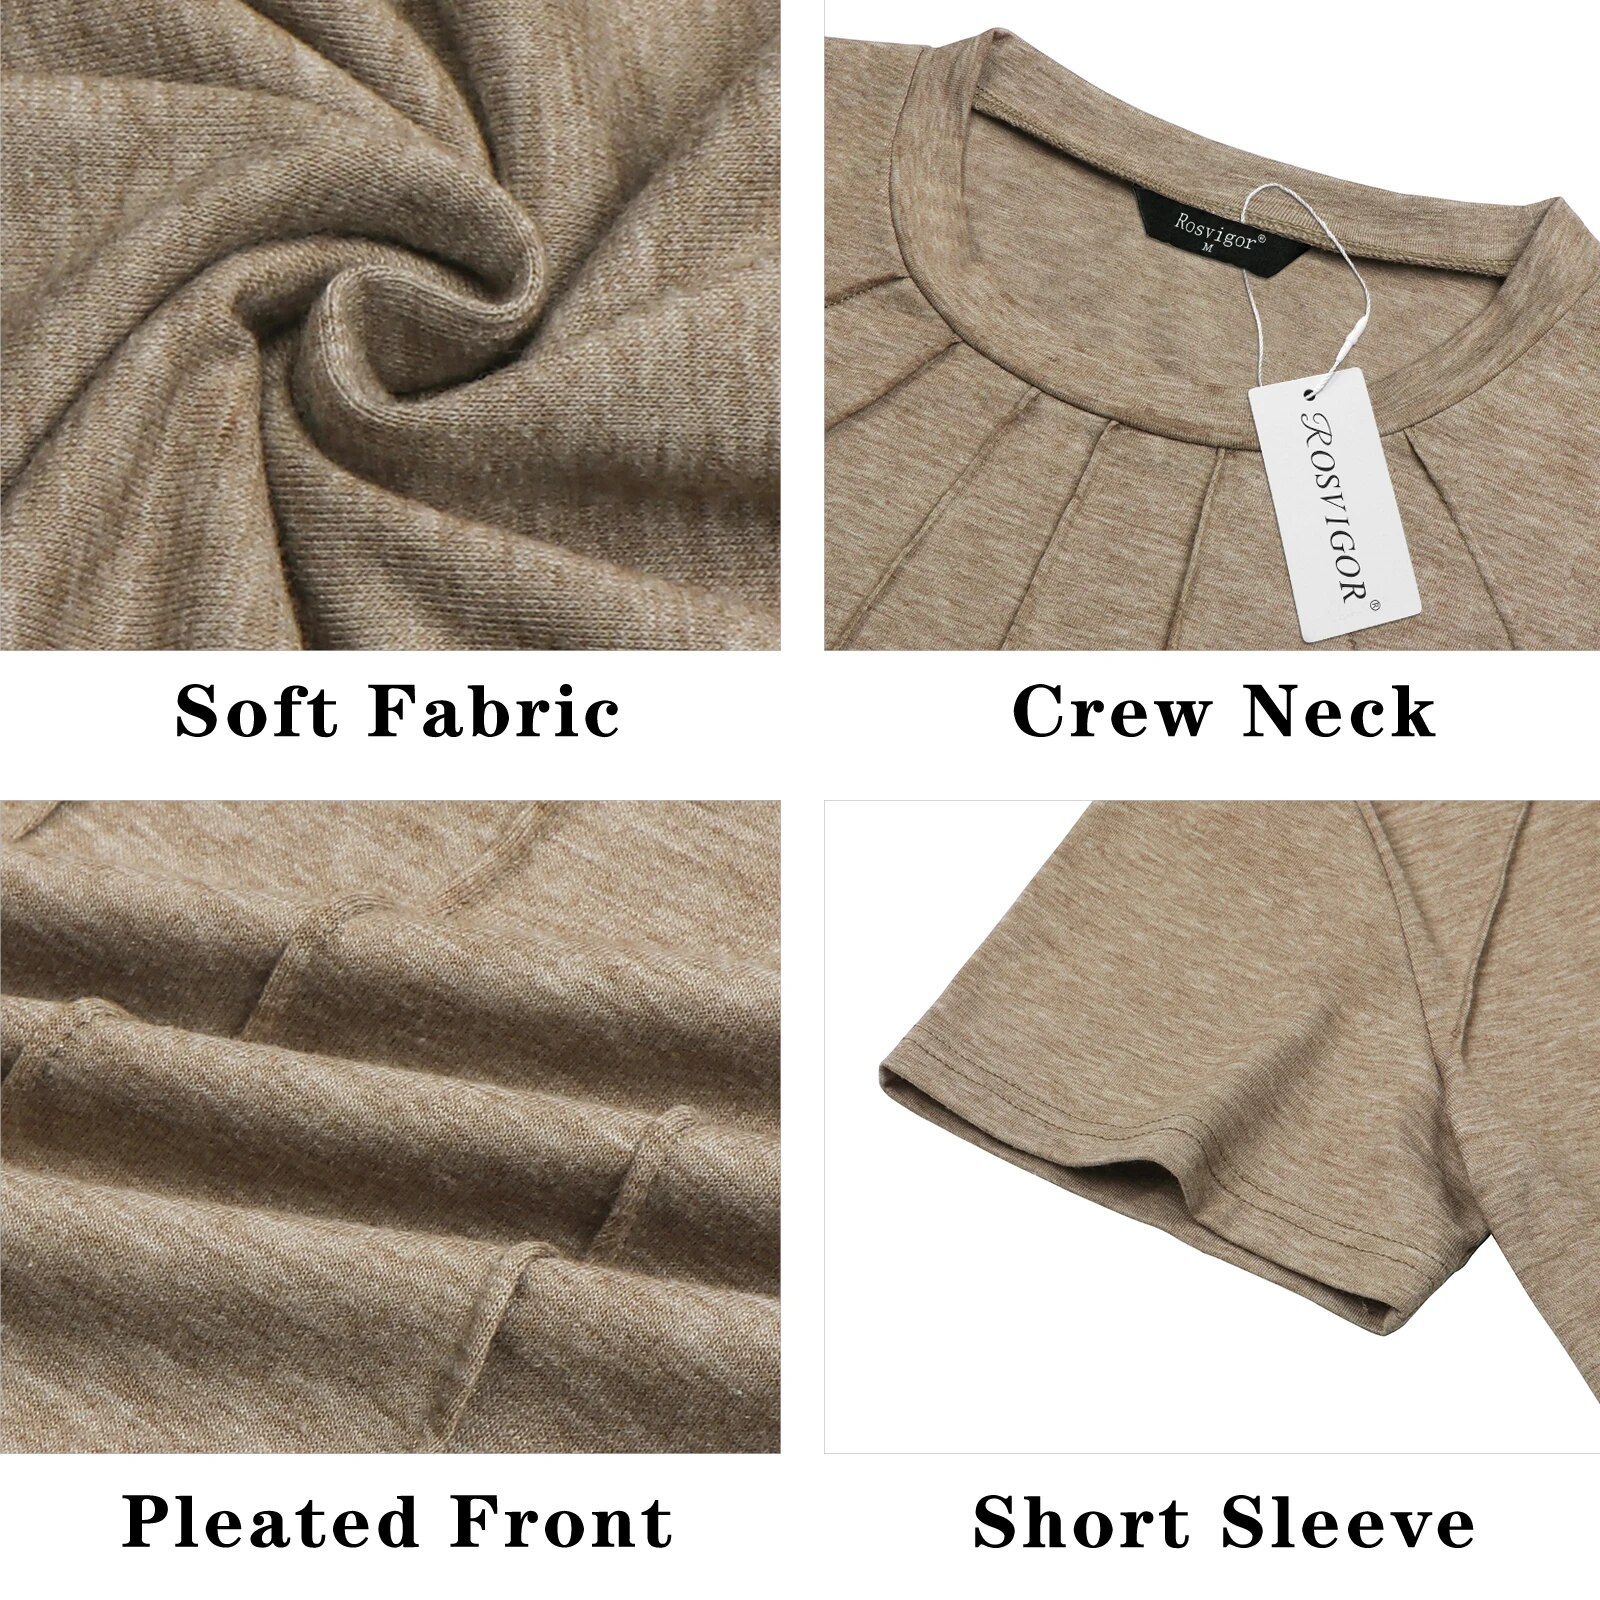 Rosvigor Blouses for Women Short Sleeve Shirts Casual Dressy Summer Tops with Pleats - image 5 of 7